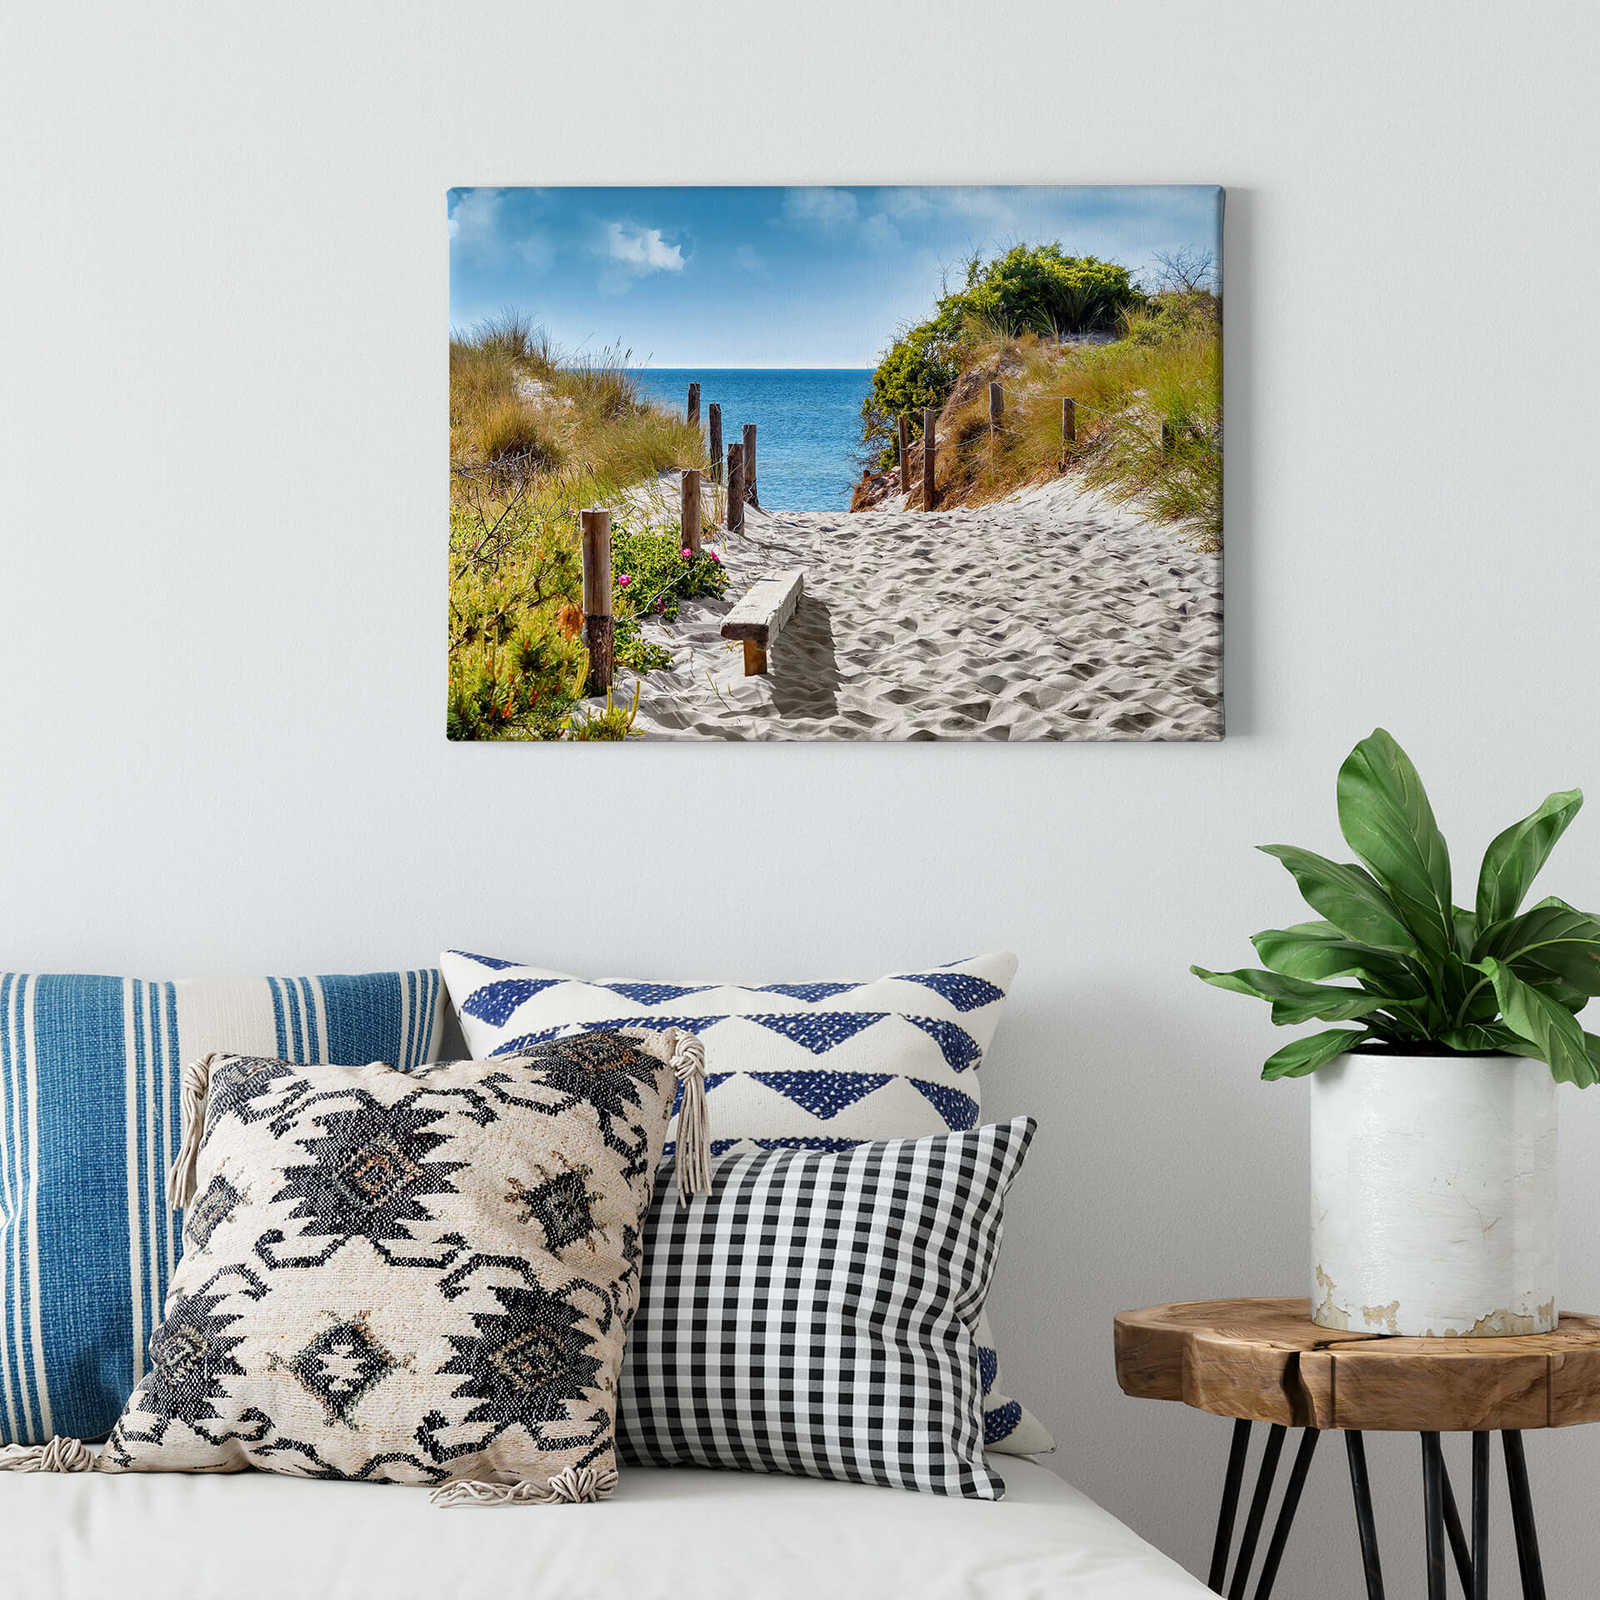             Canvas print dune crossing with sea view
        